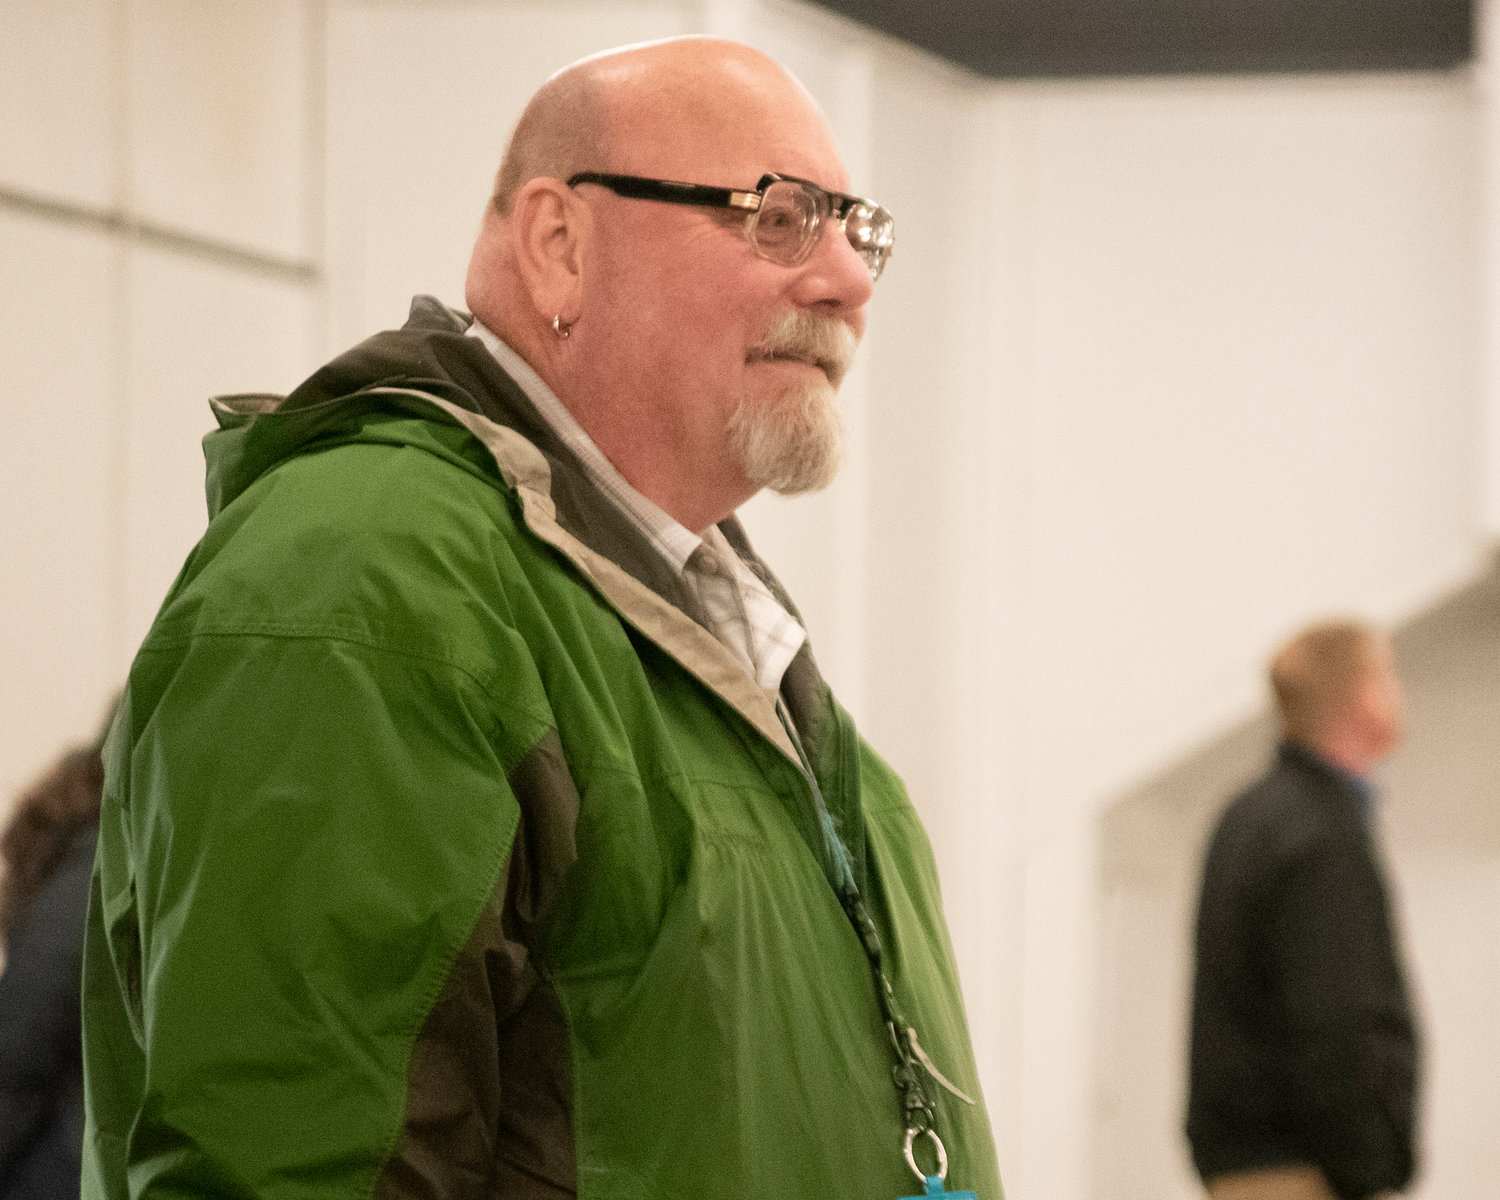 Lewis County Department of Emergency Management Deputy Director Ross McDowell listens during a facilitated public forum on a proposed night-by-night shelter in Lewis County on Thursday night at the Southwest Washington Fairgrounds.